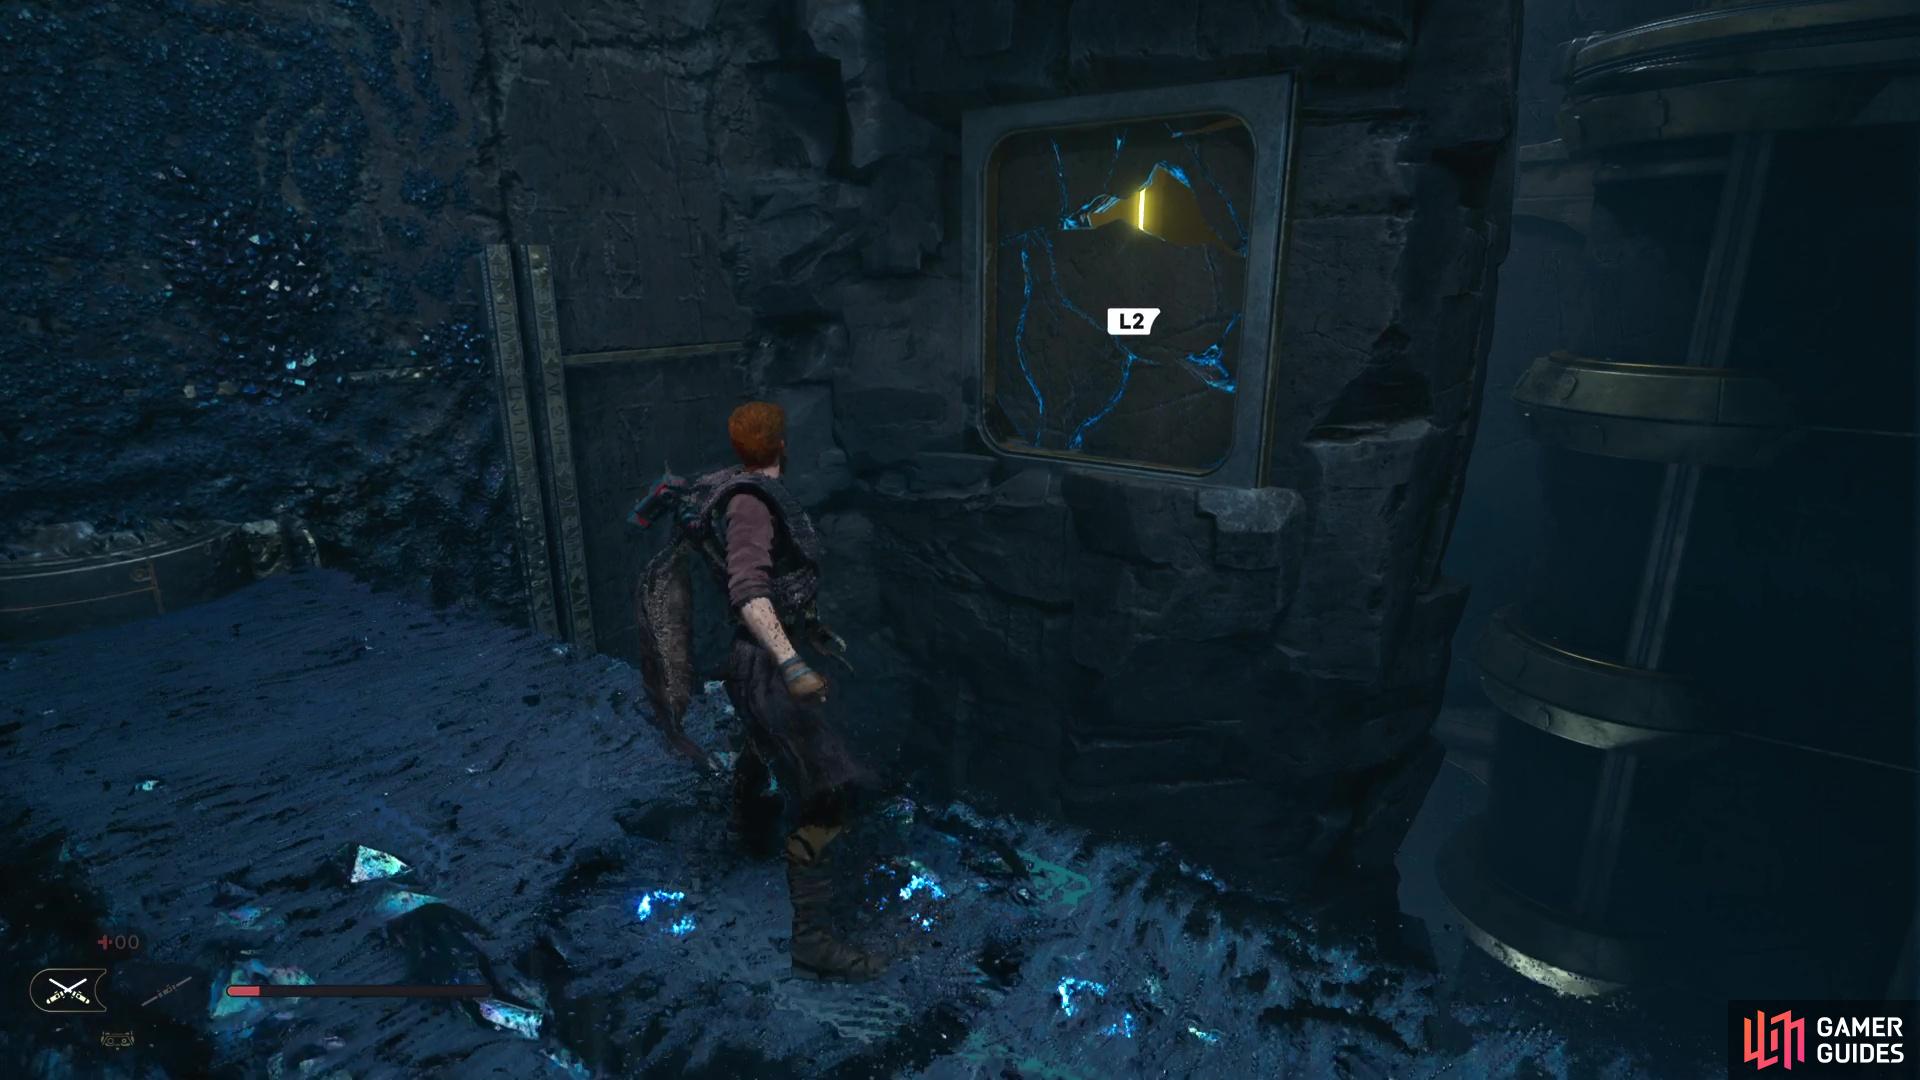 taking the bridge across and grab the next Orb from this wall.